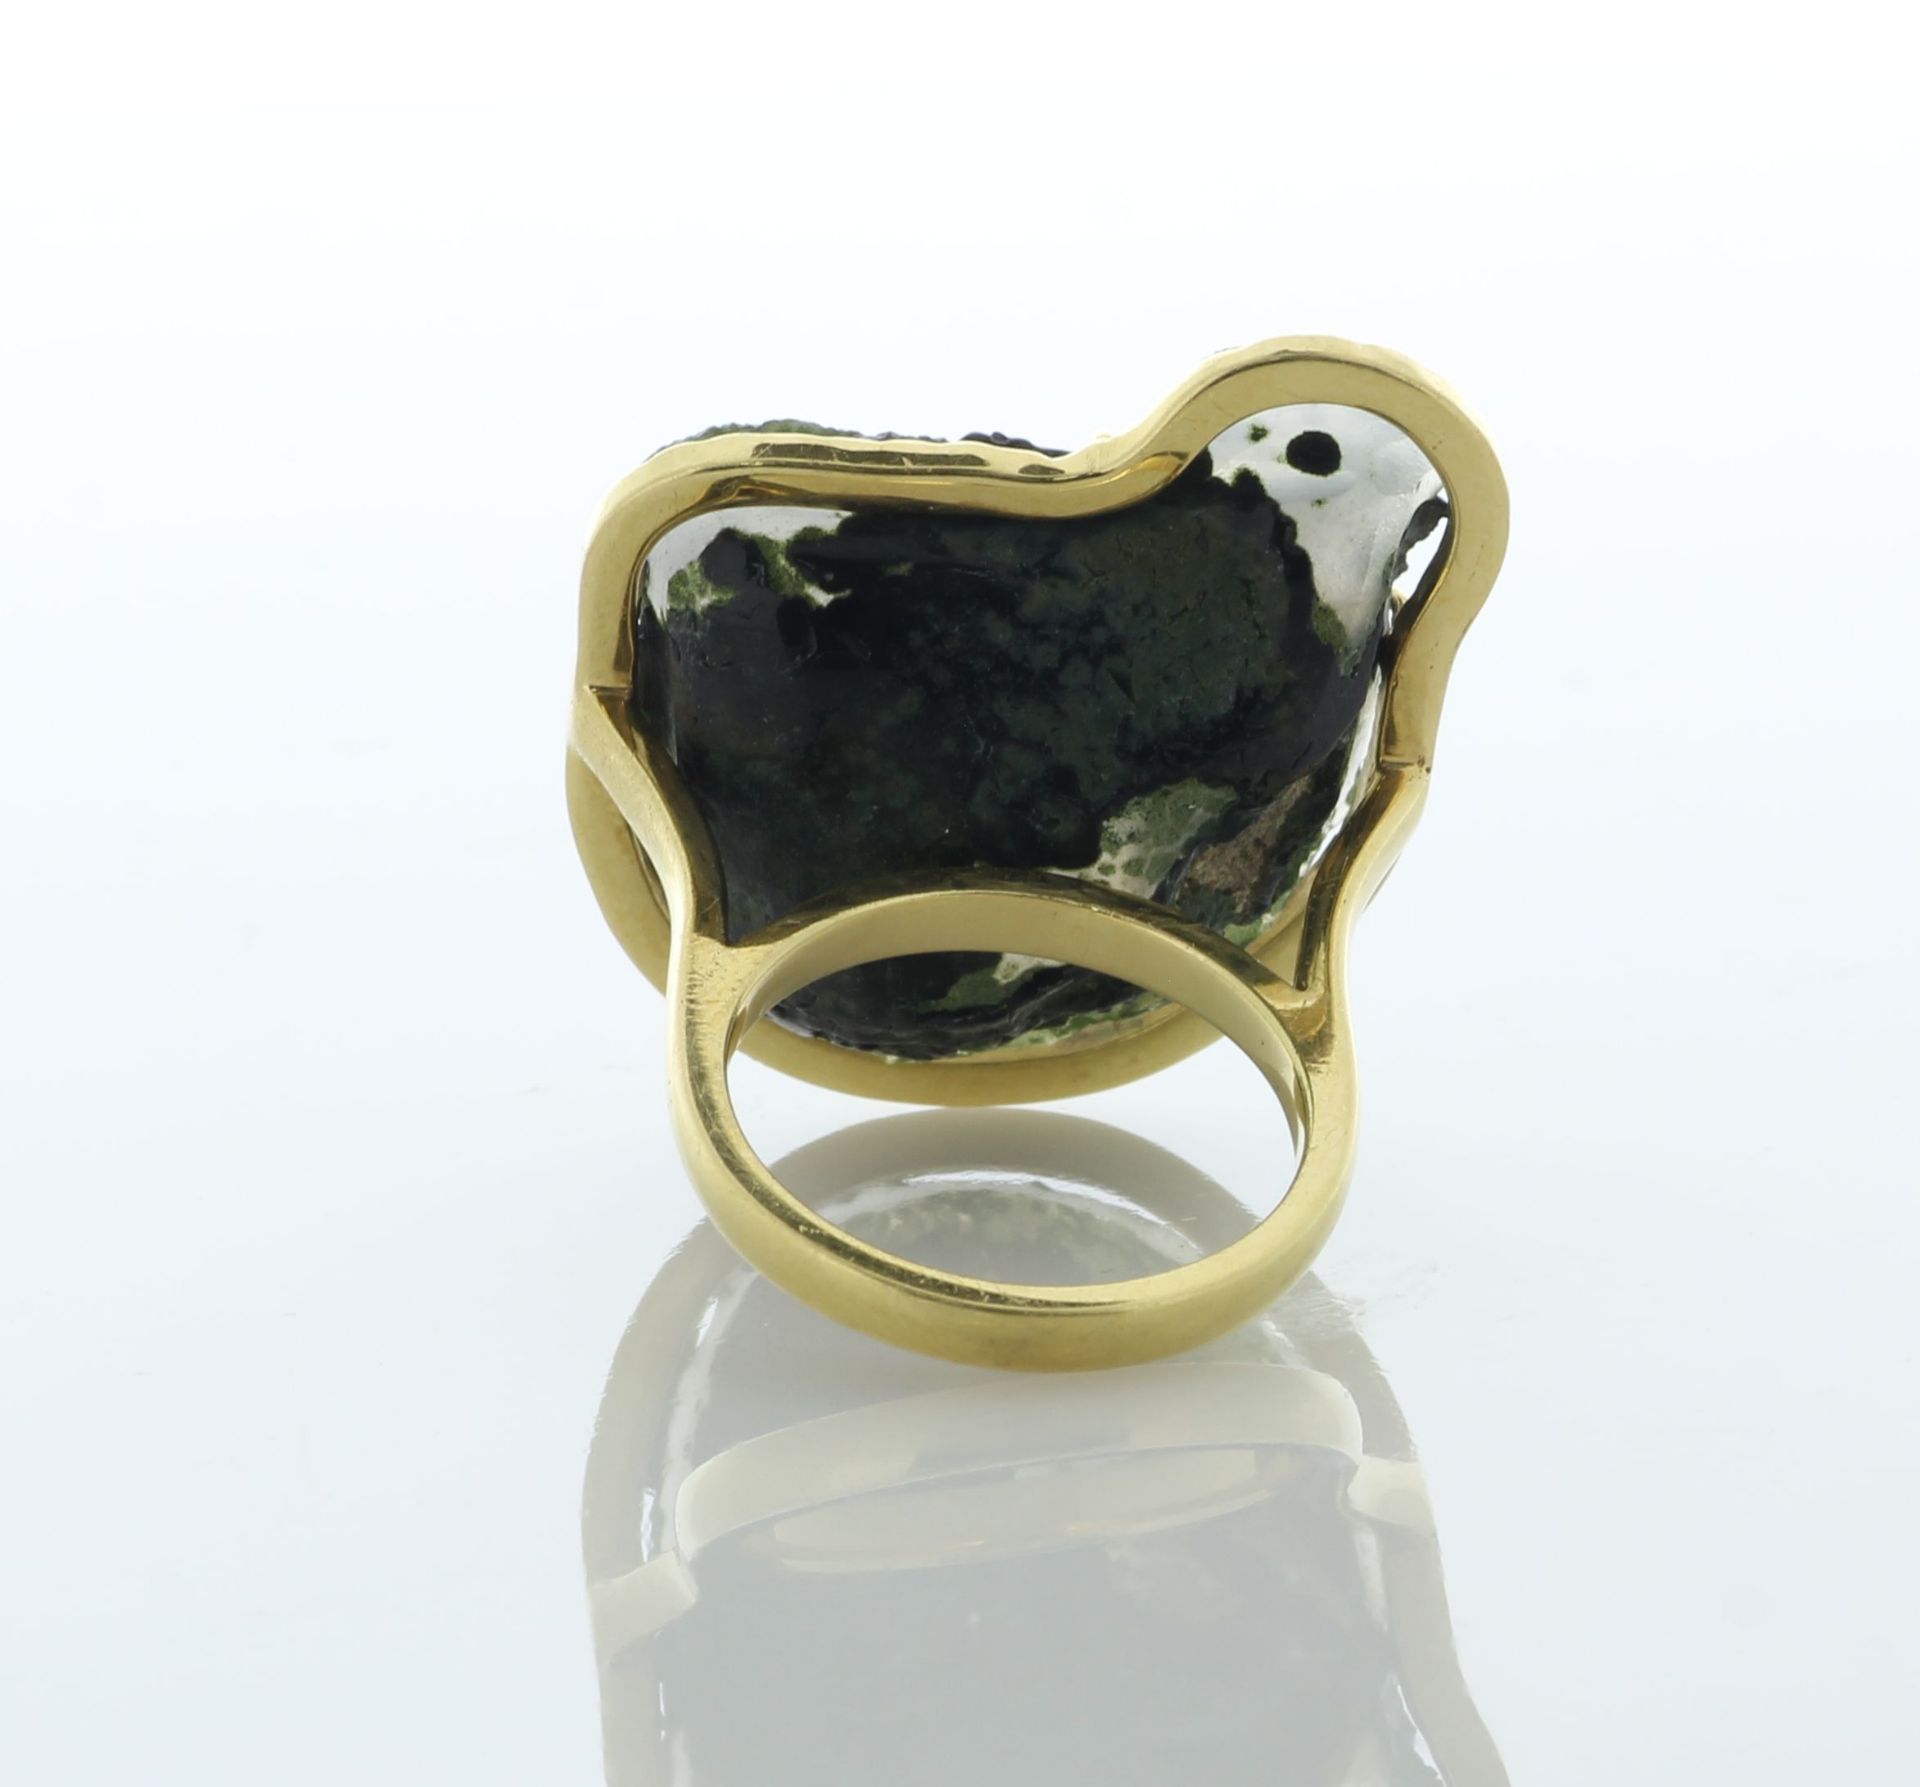 18ct Yellow Gold Diamond And Fossil Ring 0.60 Carats - Valued By AGI £7,560.00 - Image 3 of 5